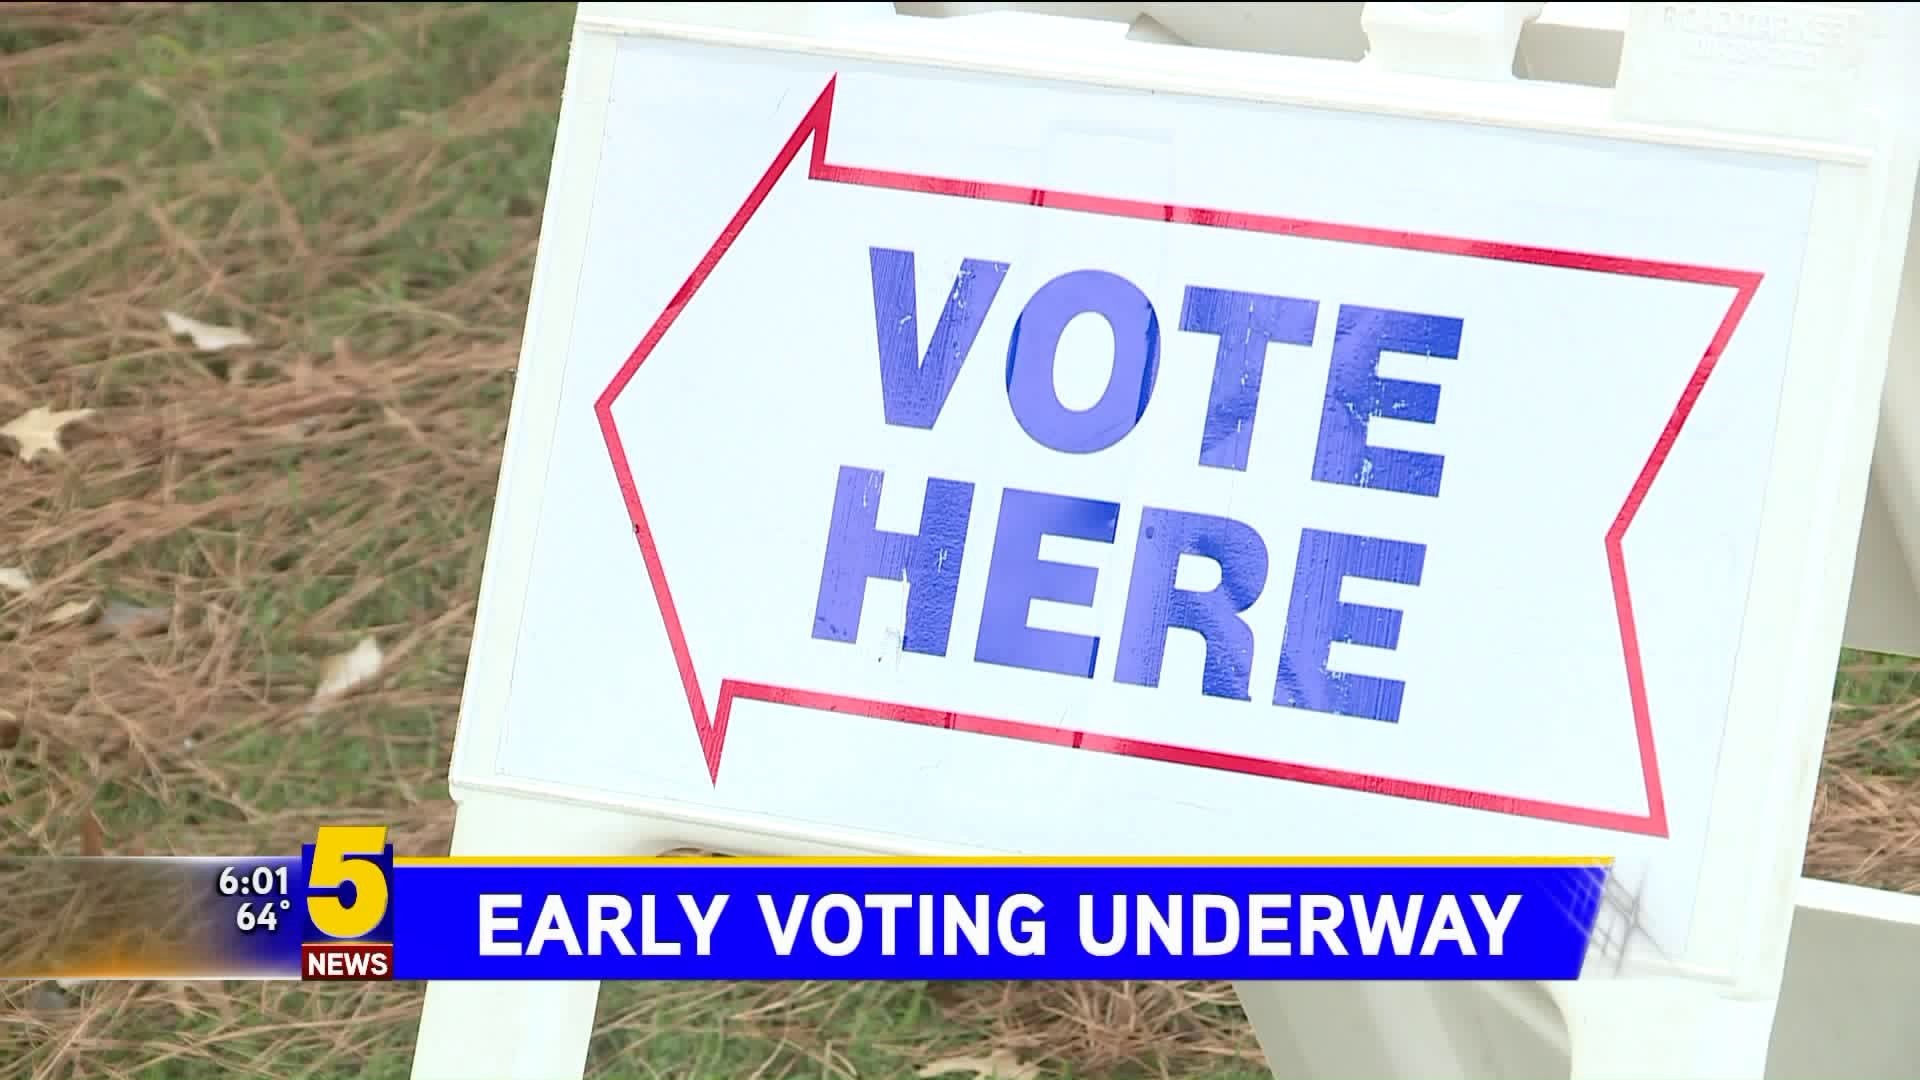 Early Voting Underway Where You Live